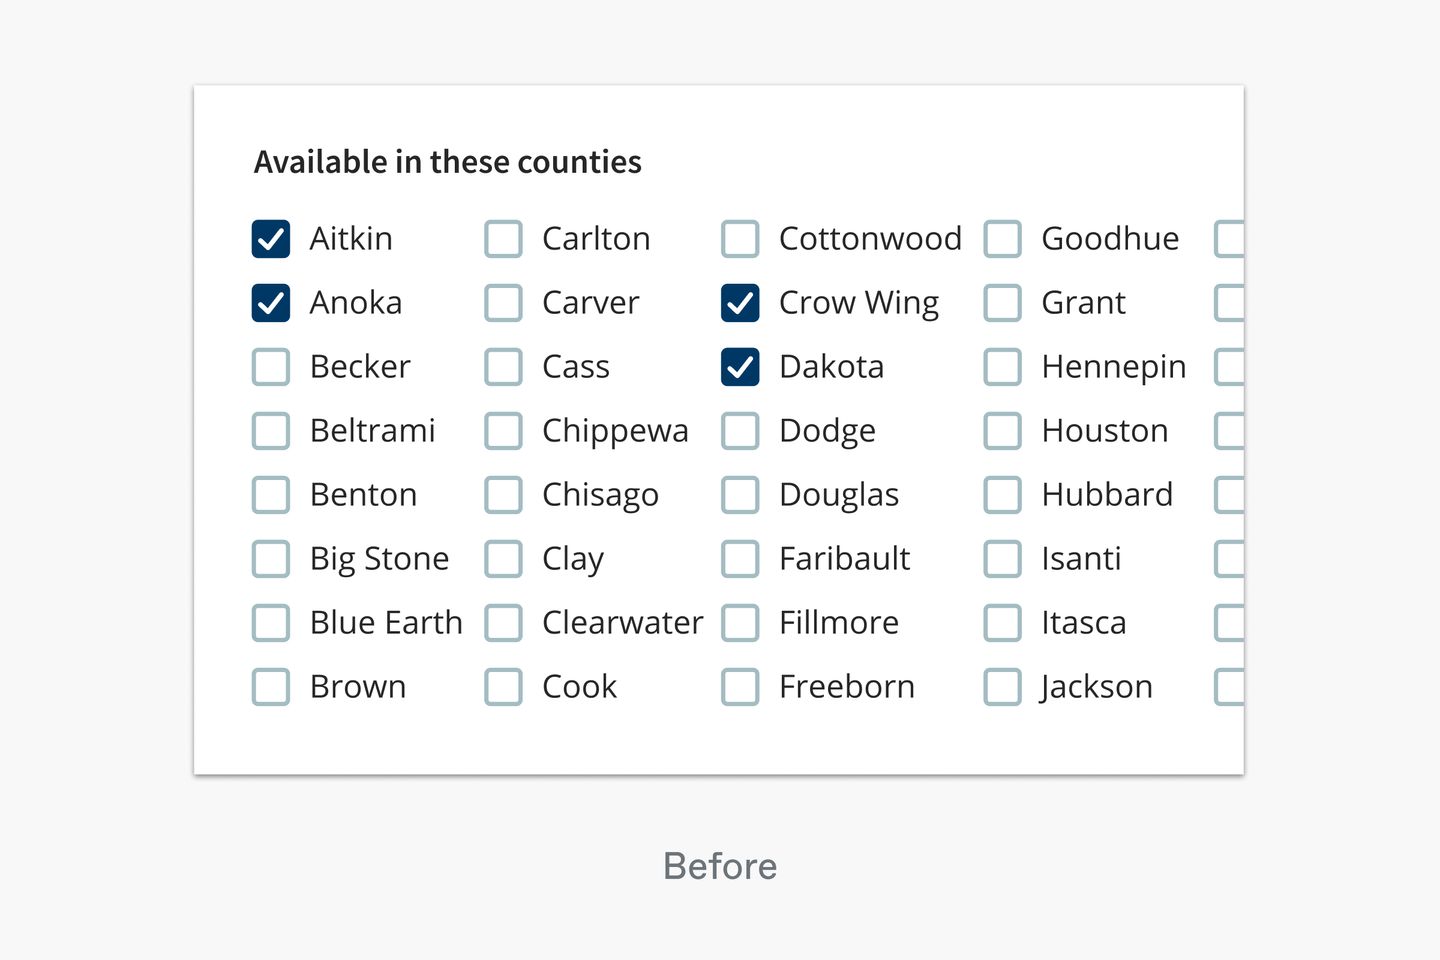 Question in a webform that includes 87 checkboxes for Minnesota’s counties